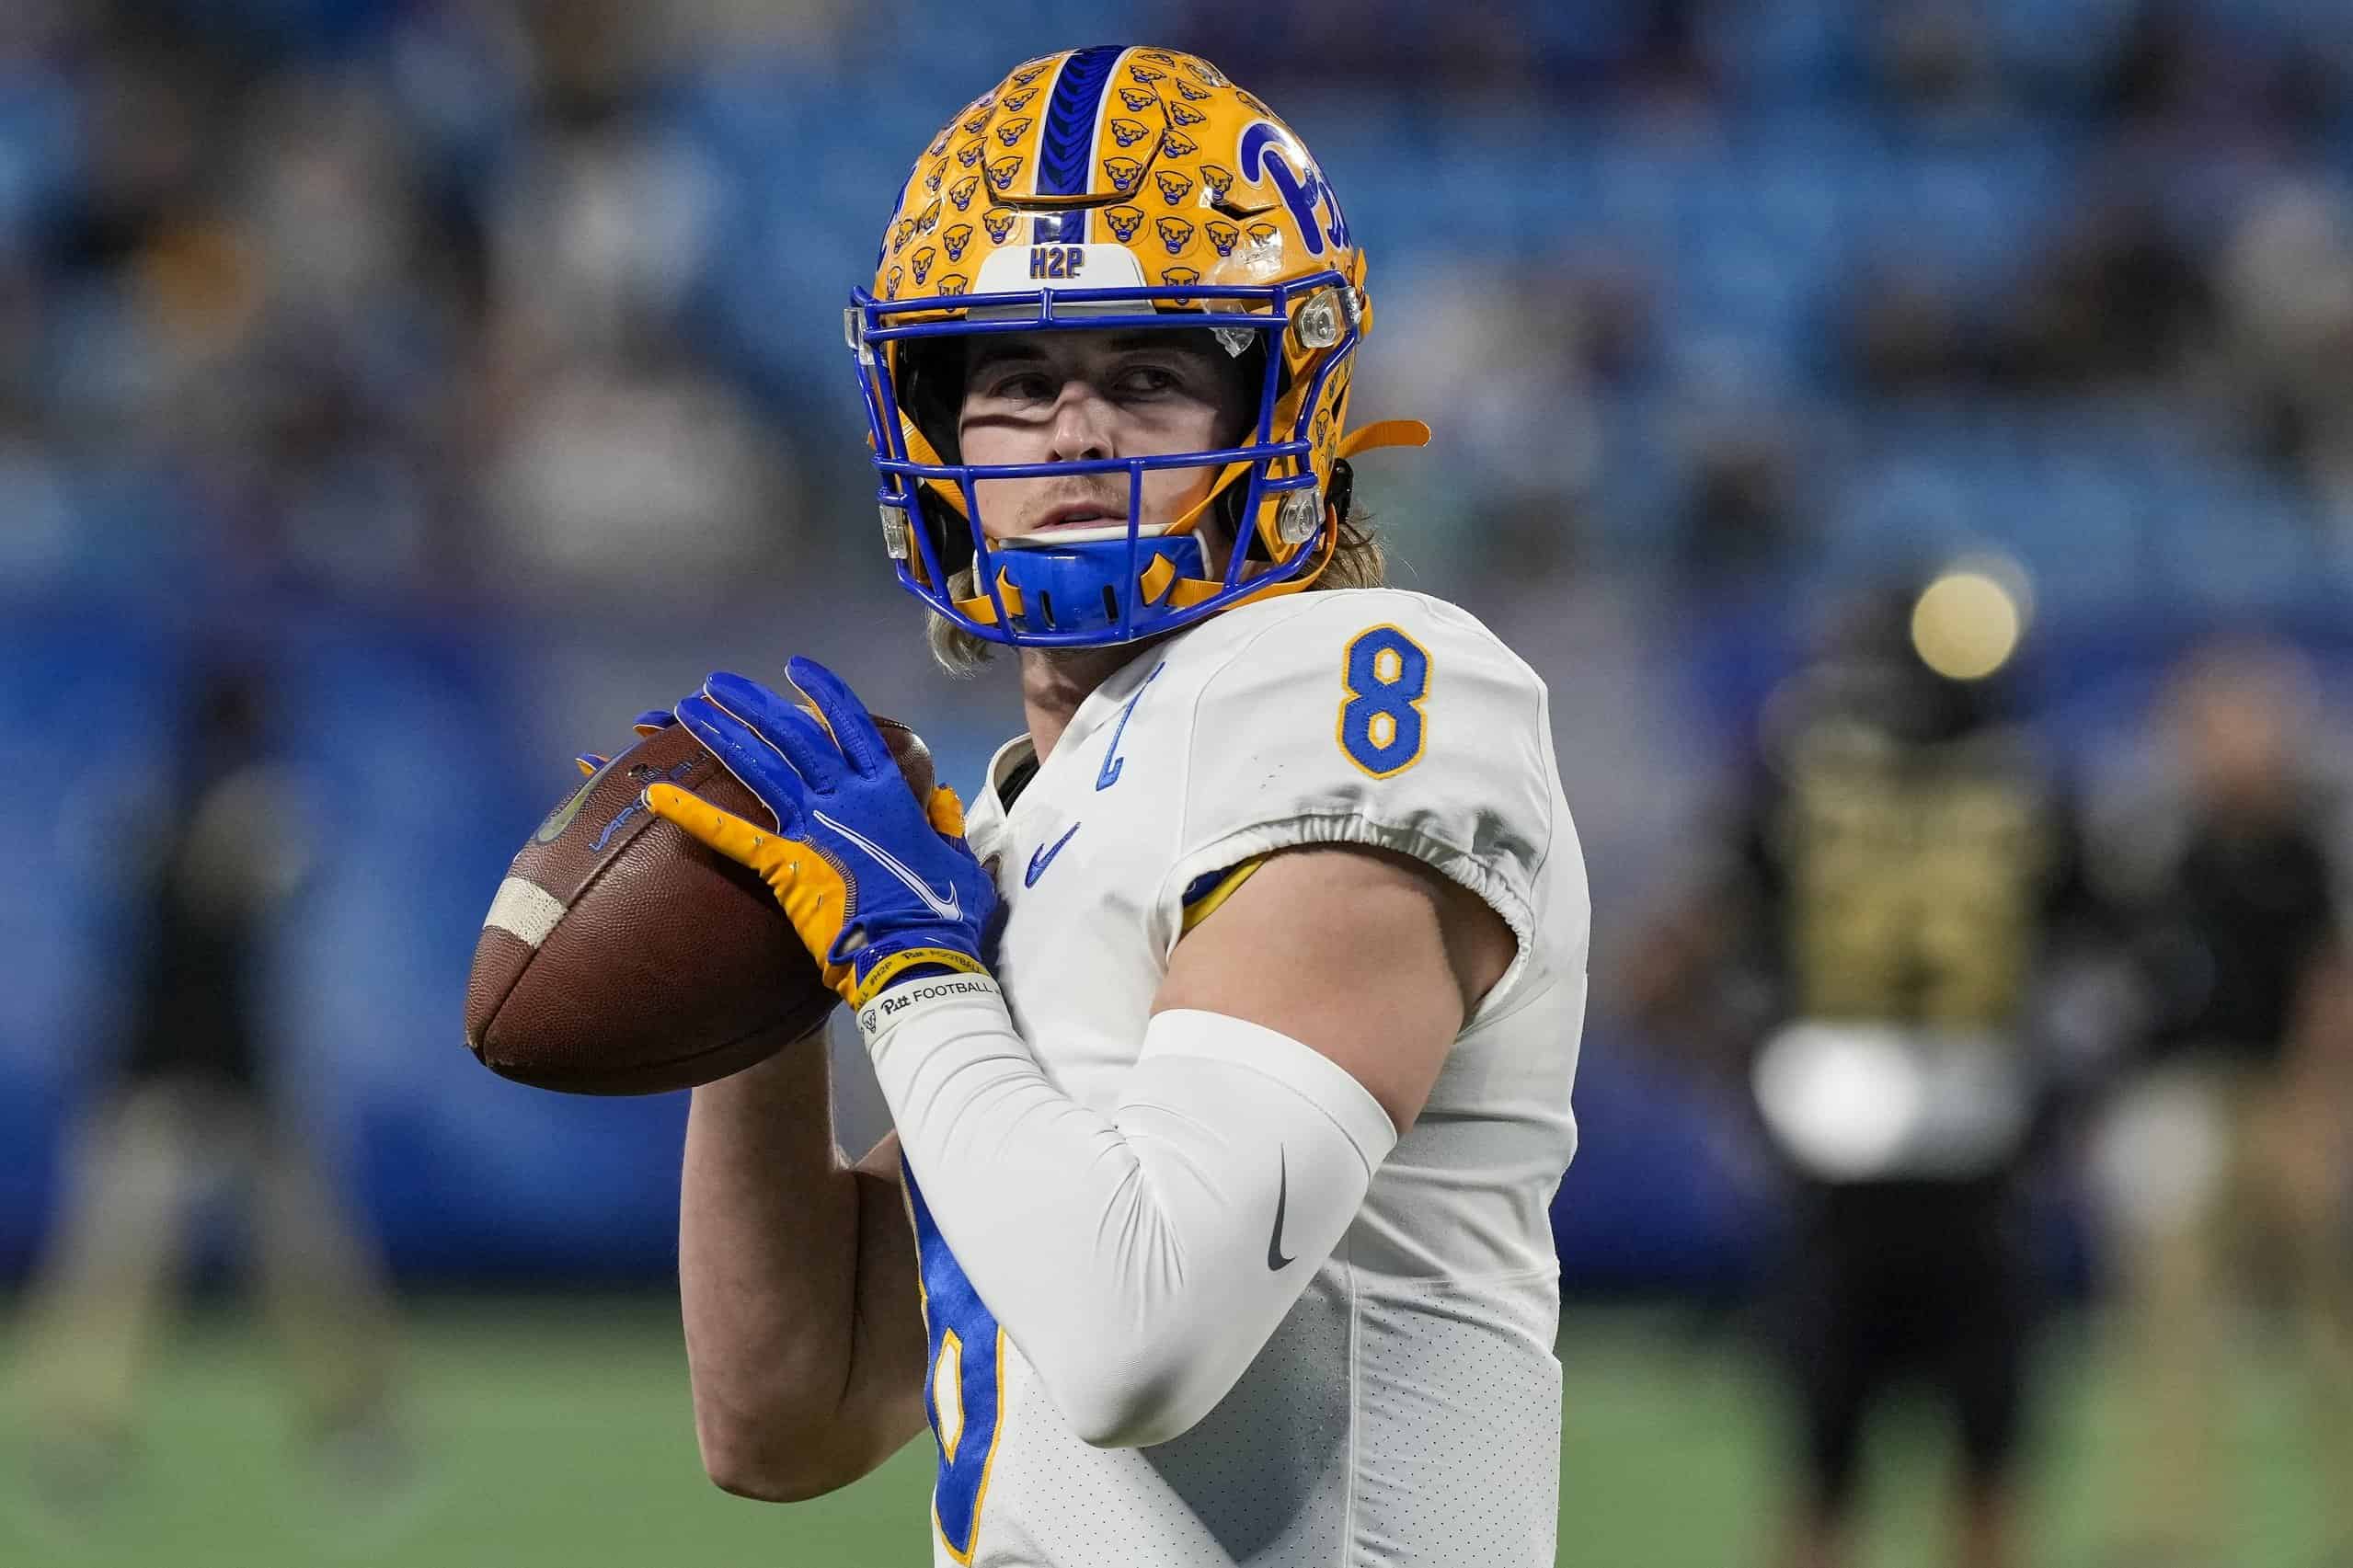 NFL Draft Prospects by Position 2022: Top 10 quarterbacks, wide receivers,  cornerbacks, and more